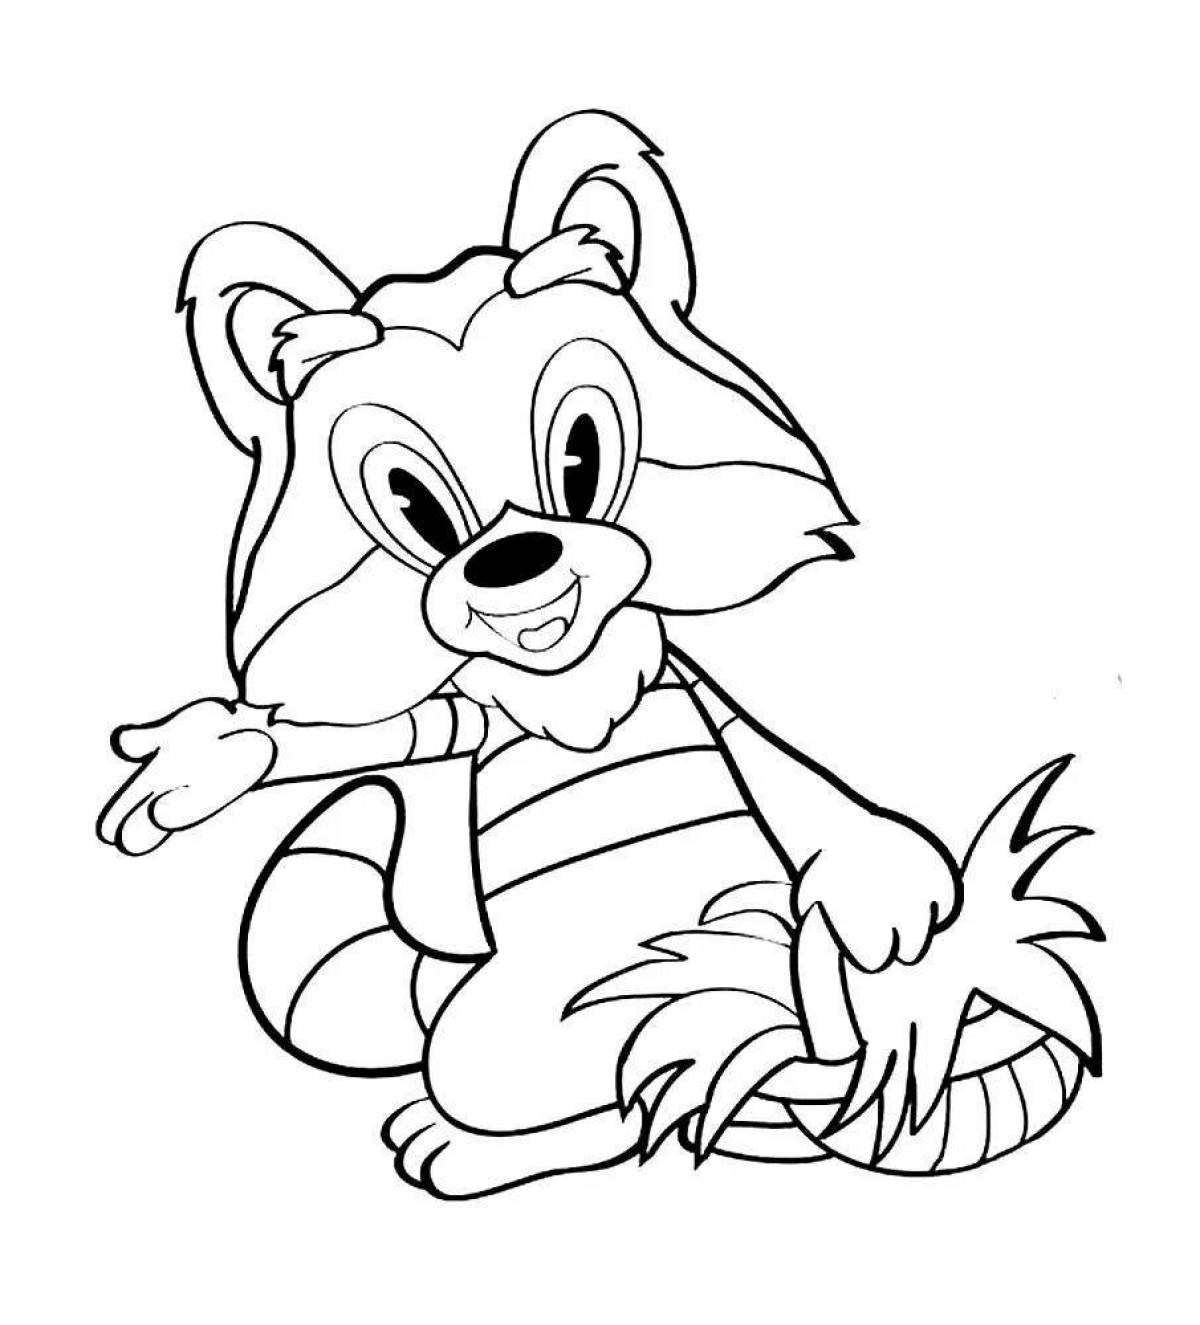 A funny raccoon coloring book